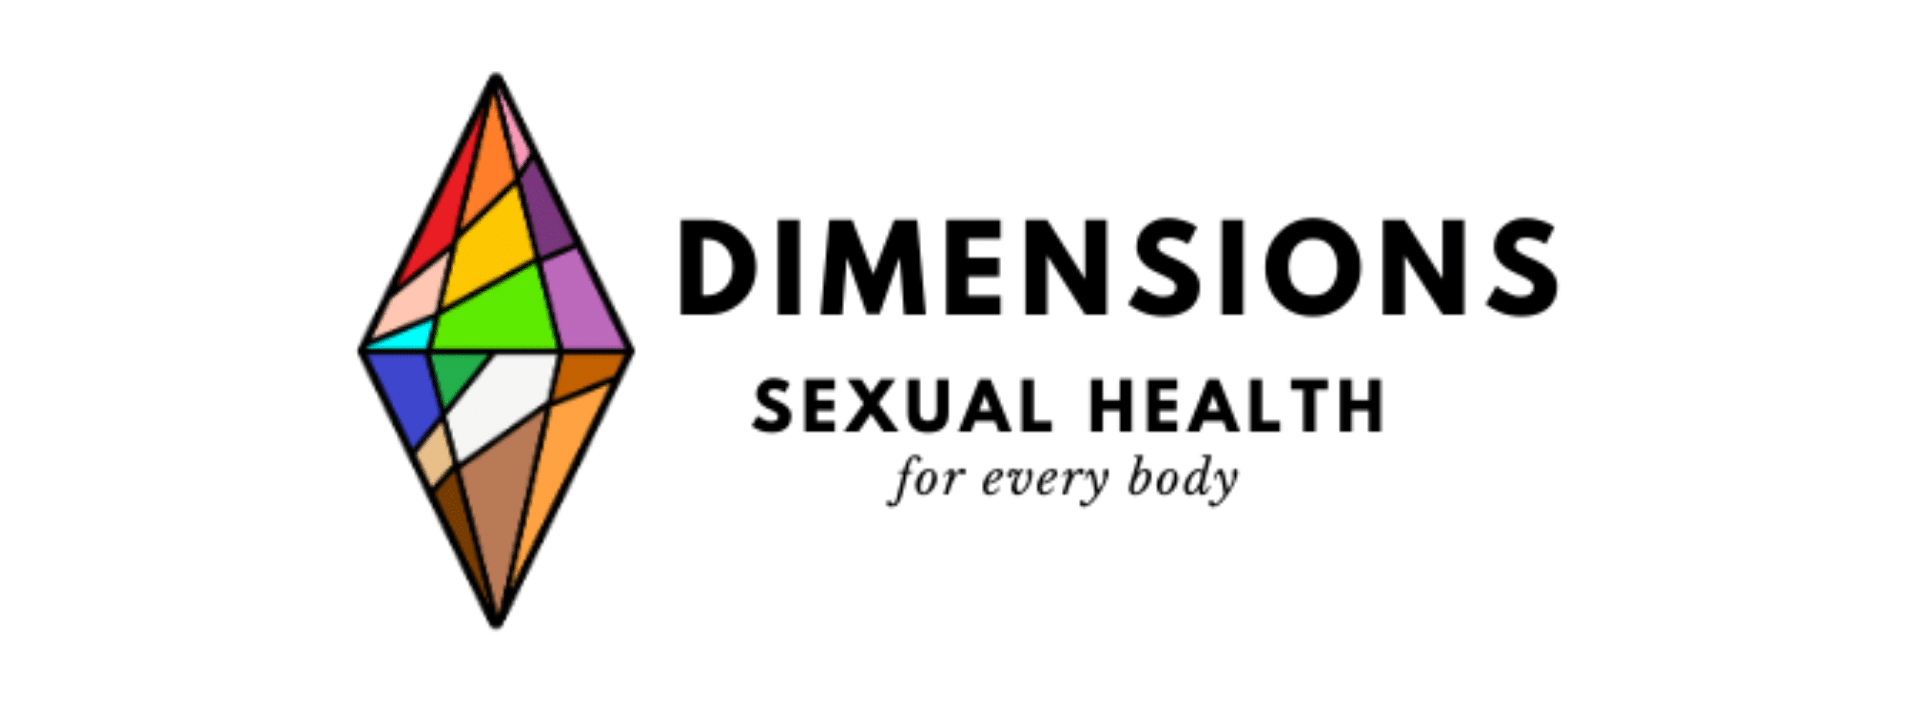 Dimensions: Sexual Health for Every Body